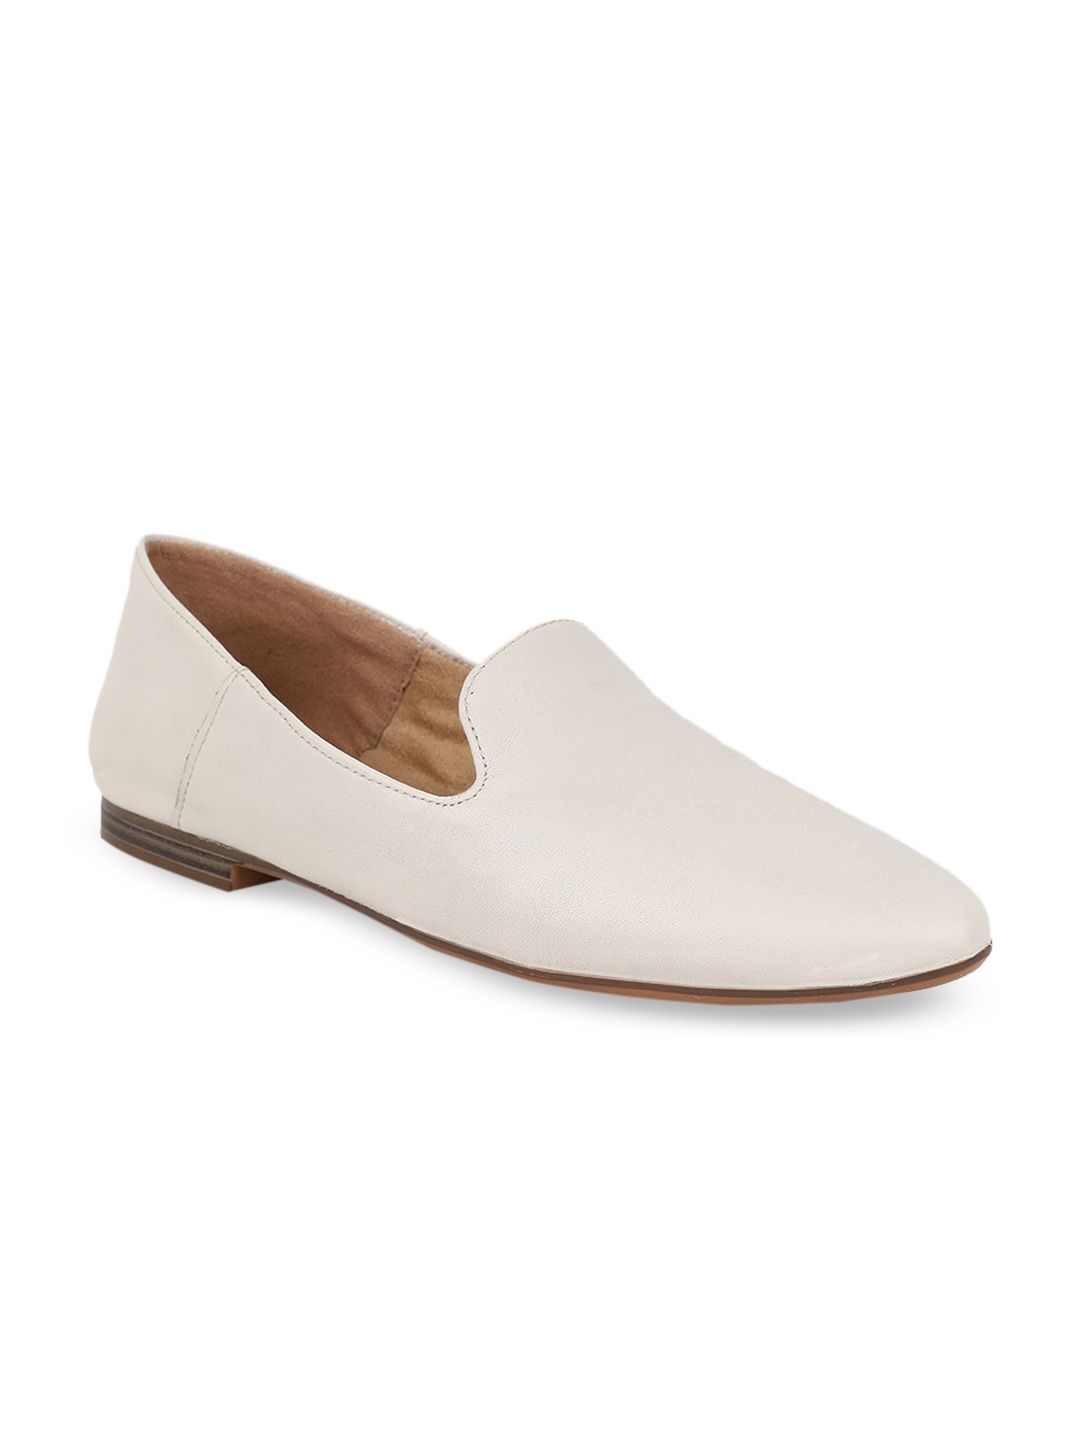 Naturalizer Women Beige Solid Leather Loafers Price in India